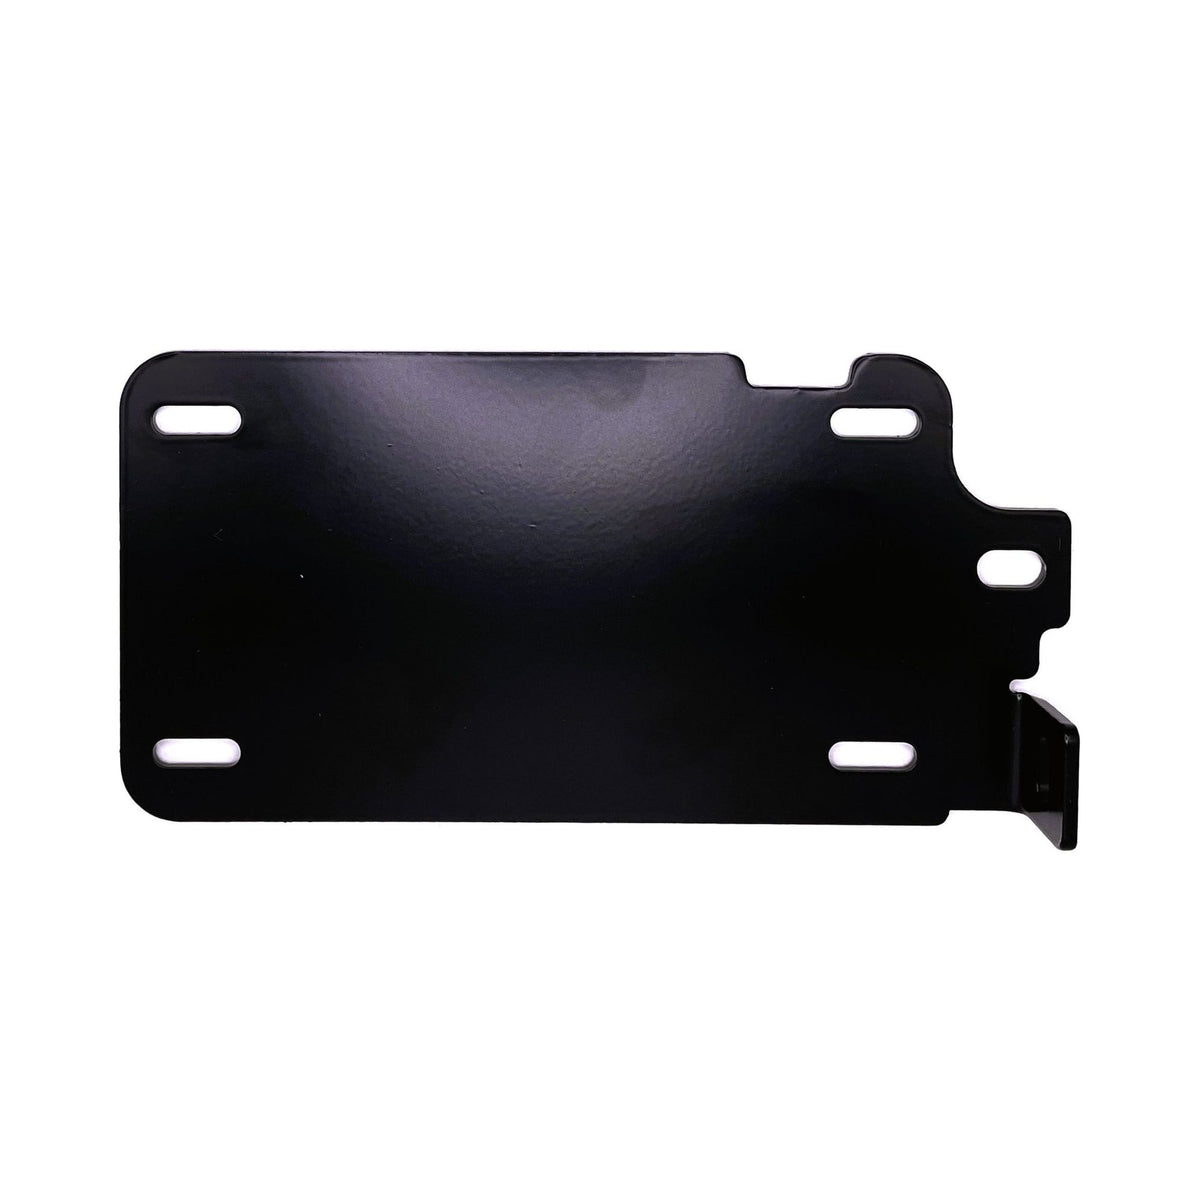 Polaris RZR XP 1000 Chassis License Plate Bracket Side Mount | WD Electronics